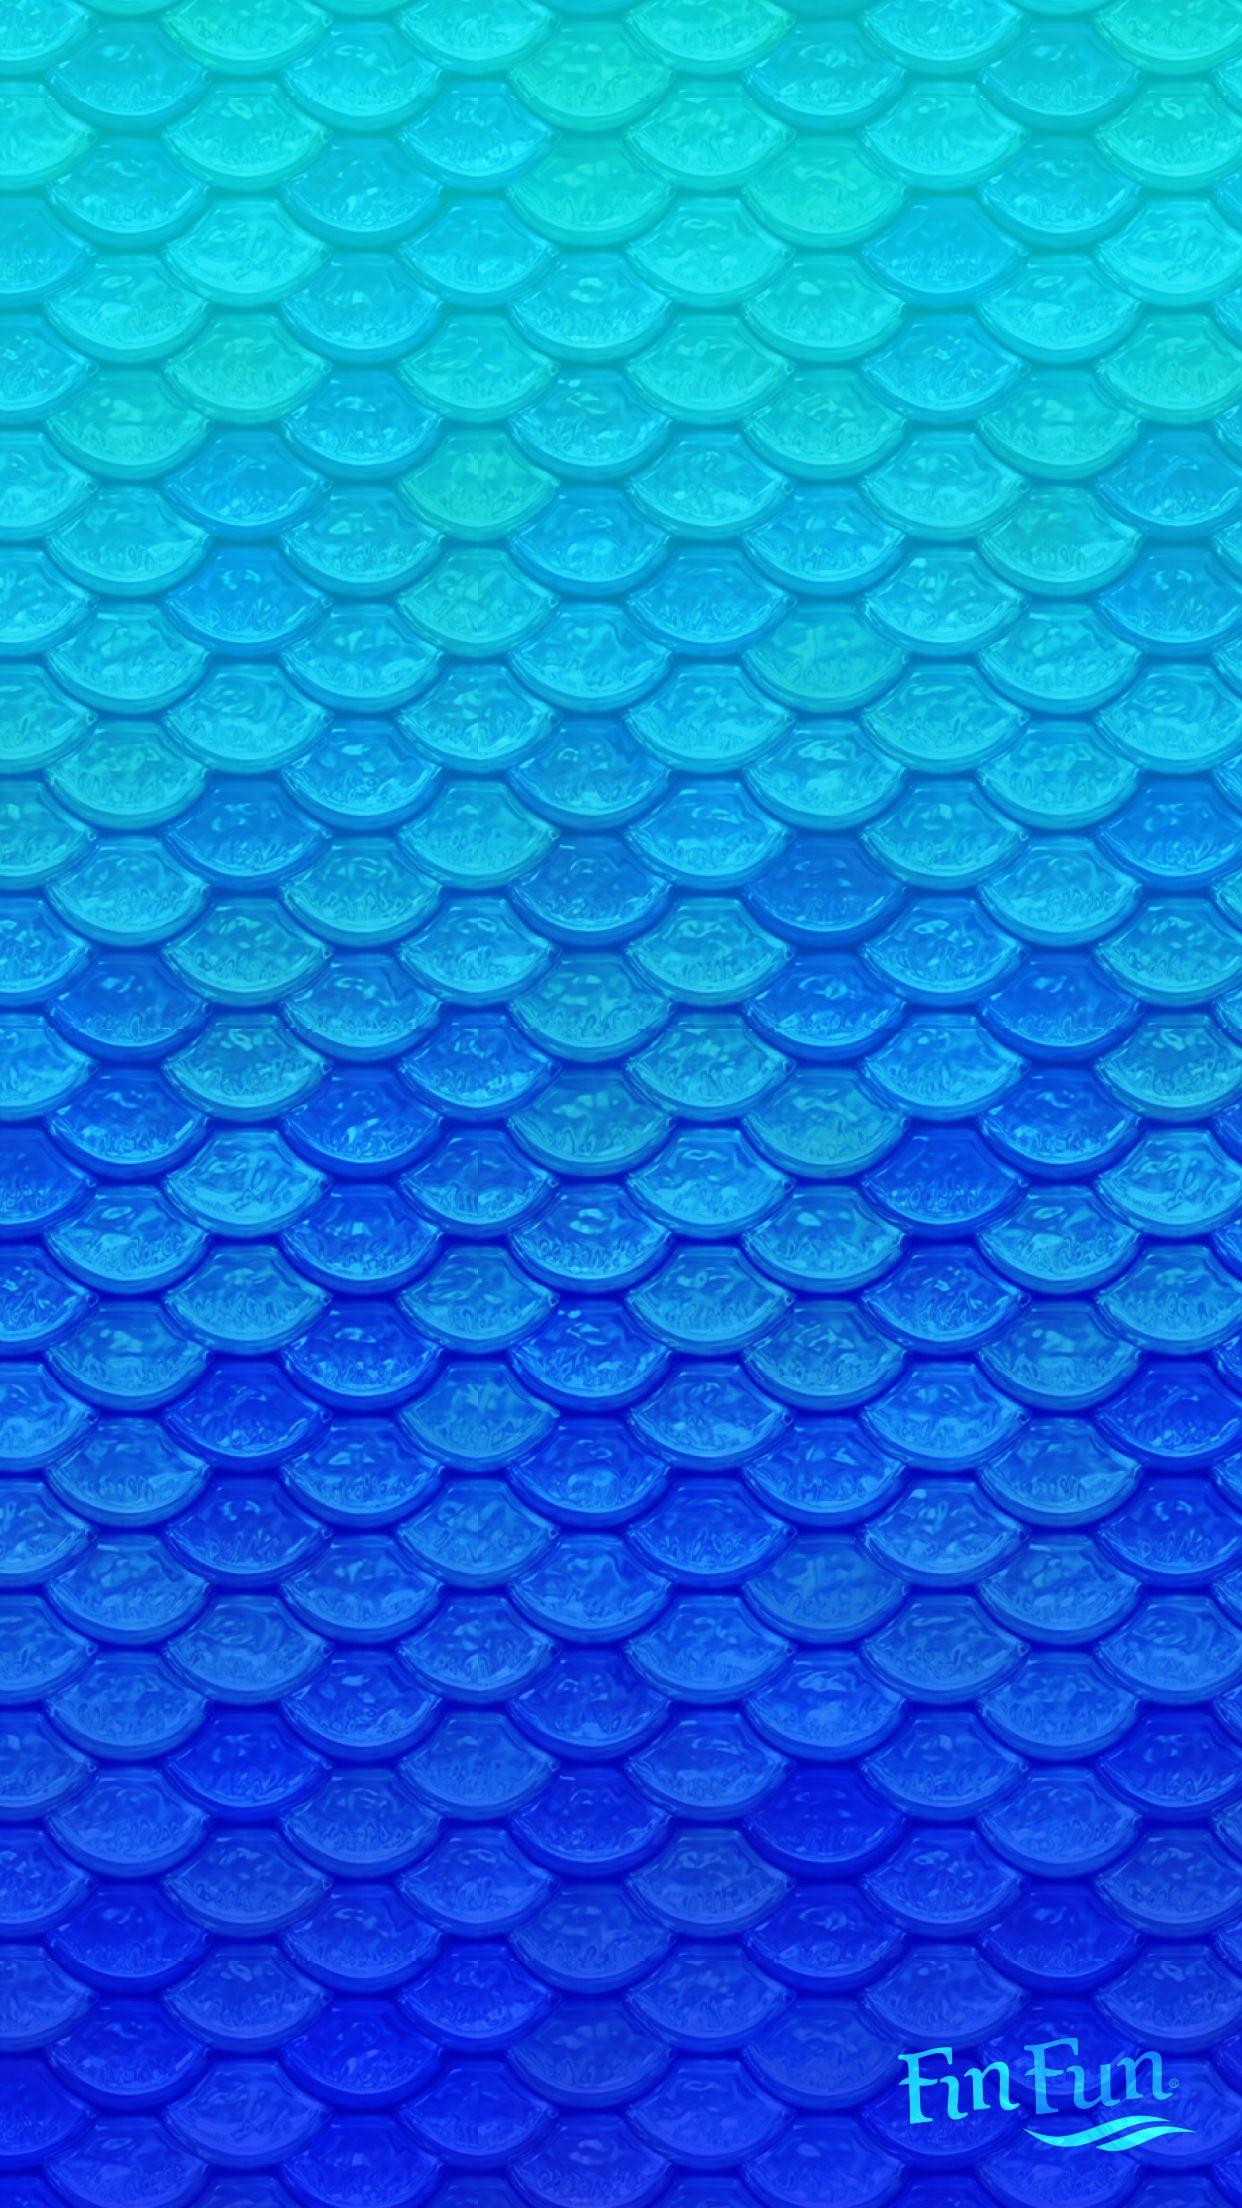 Mermaid scale wallpaper for your phone or tablet. Download similar wallpaper at FinFriends.com. Mermaid wallpaper, Phone wallpaper, Mermaid scales